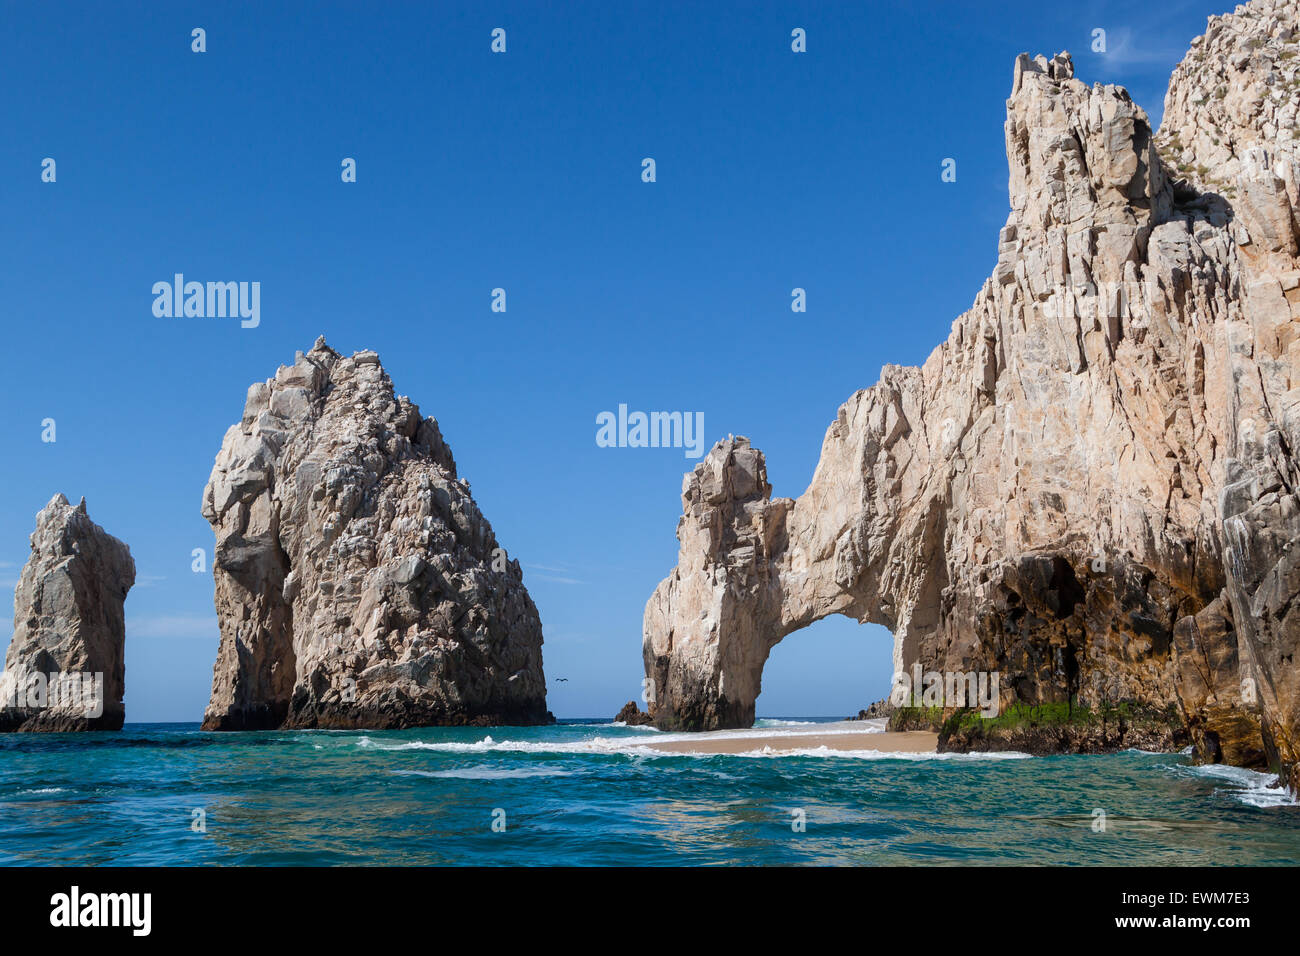 A view of the iconic arch at Land's End in Cabo San Lucas. Stock Photo